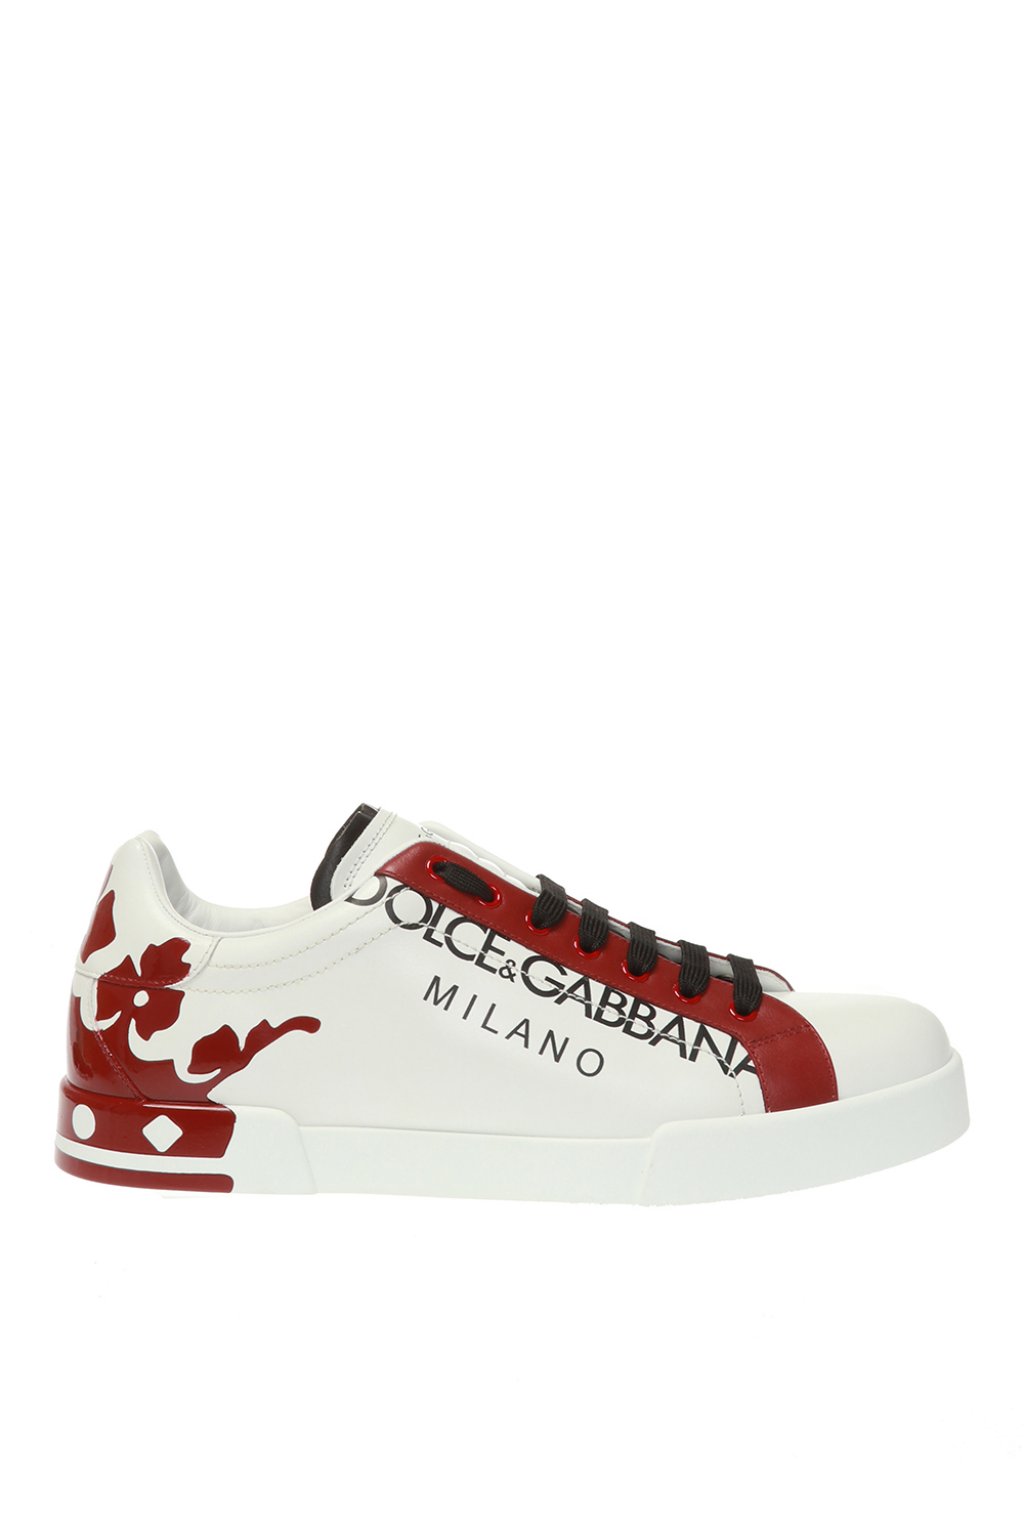 dolce and gabbana sneaker size guide